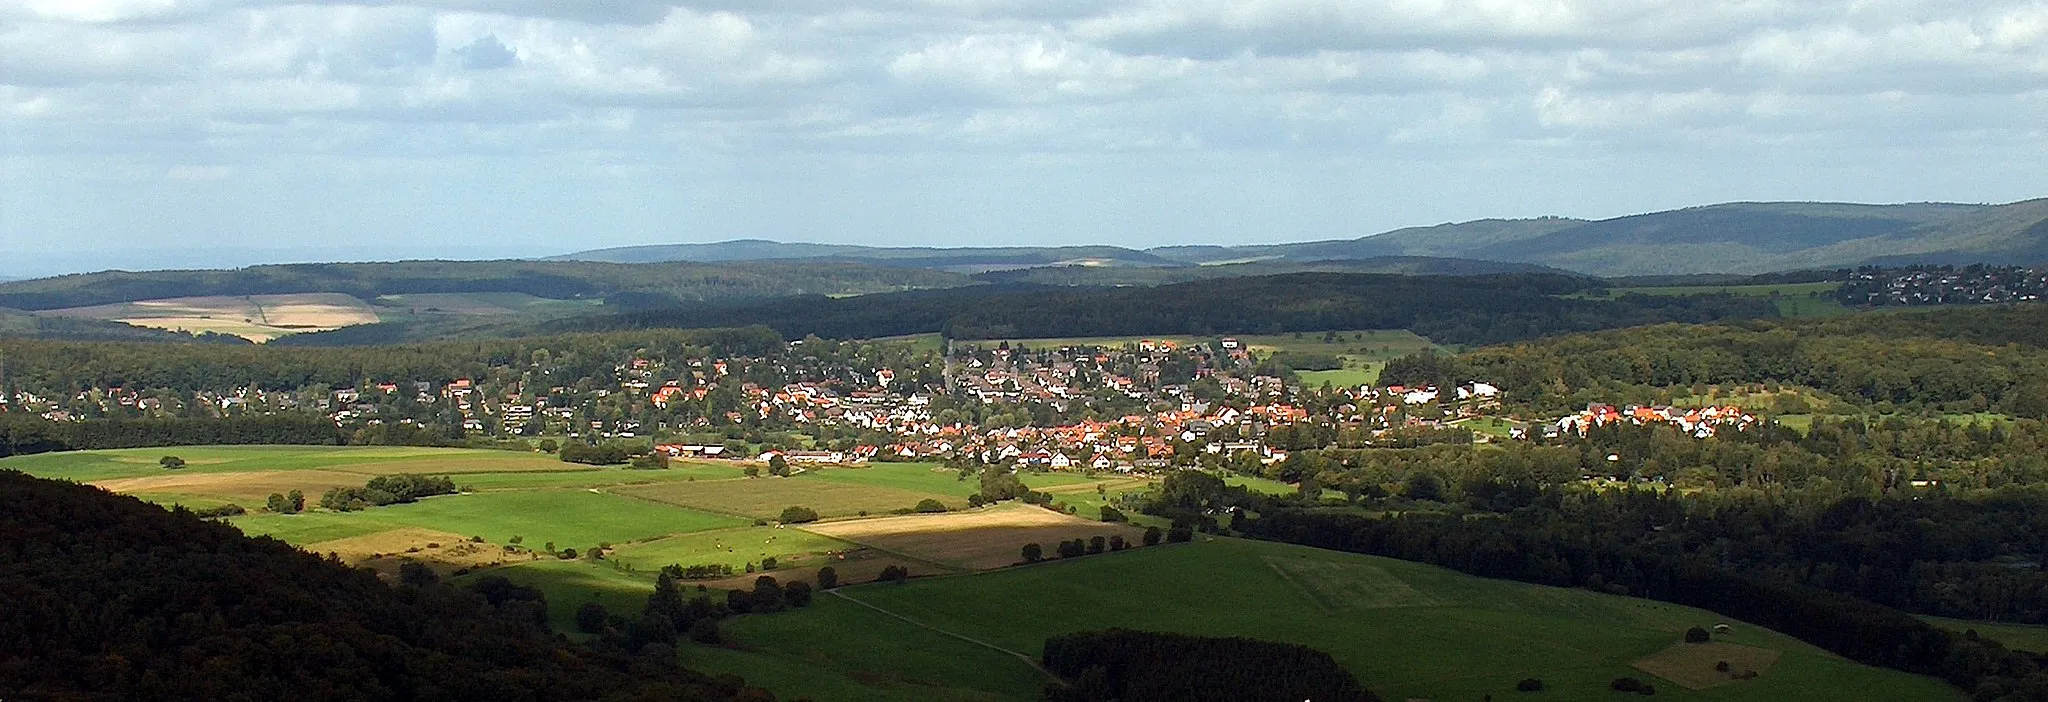 Photo showing: Panorama of Schloßborn, Germany